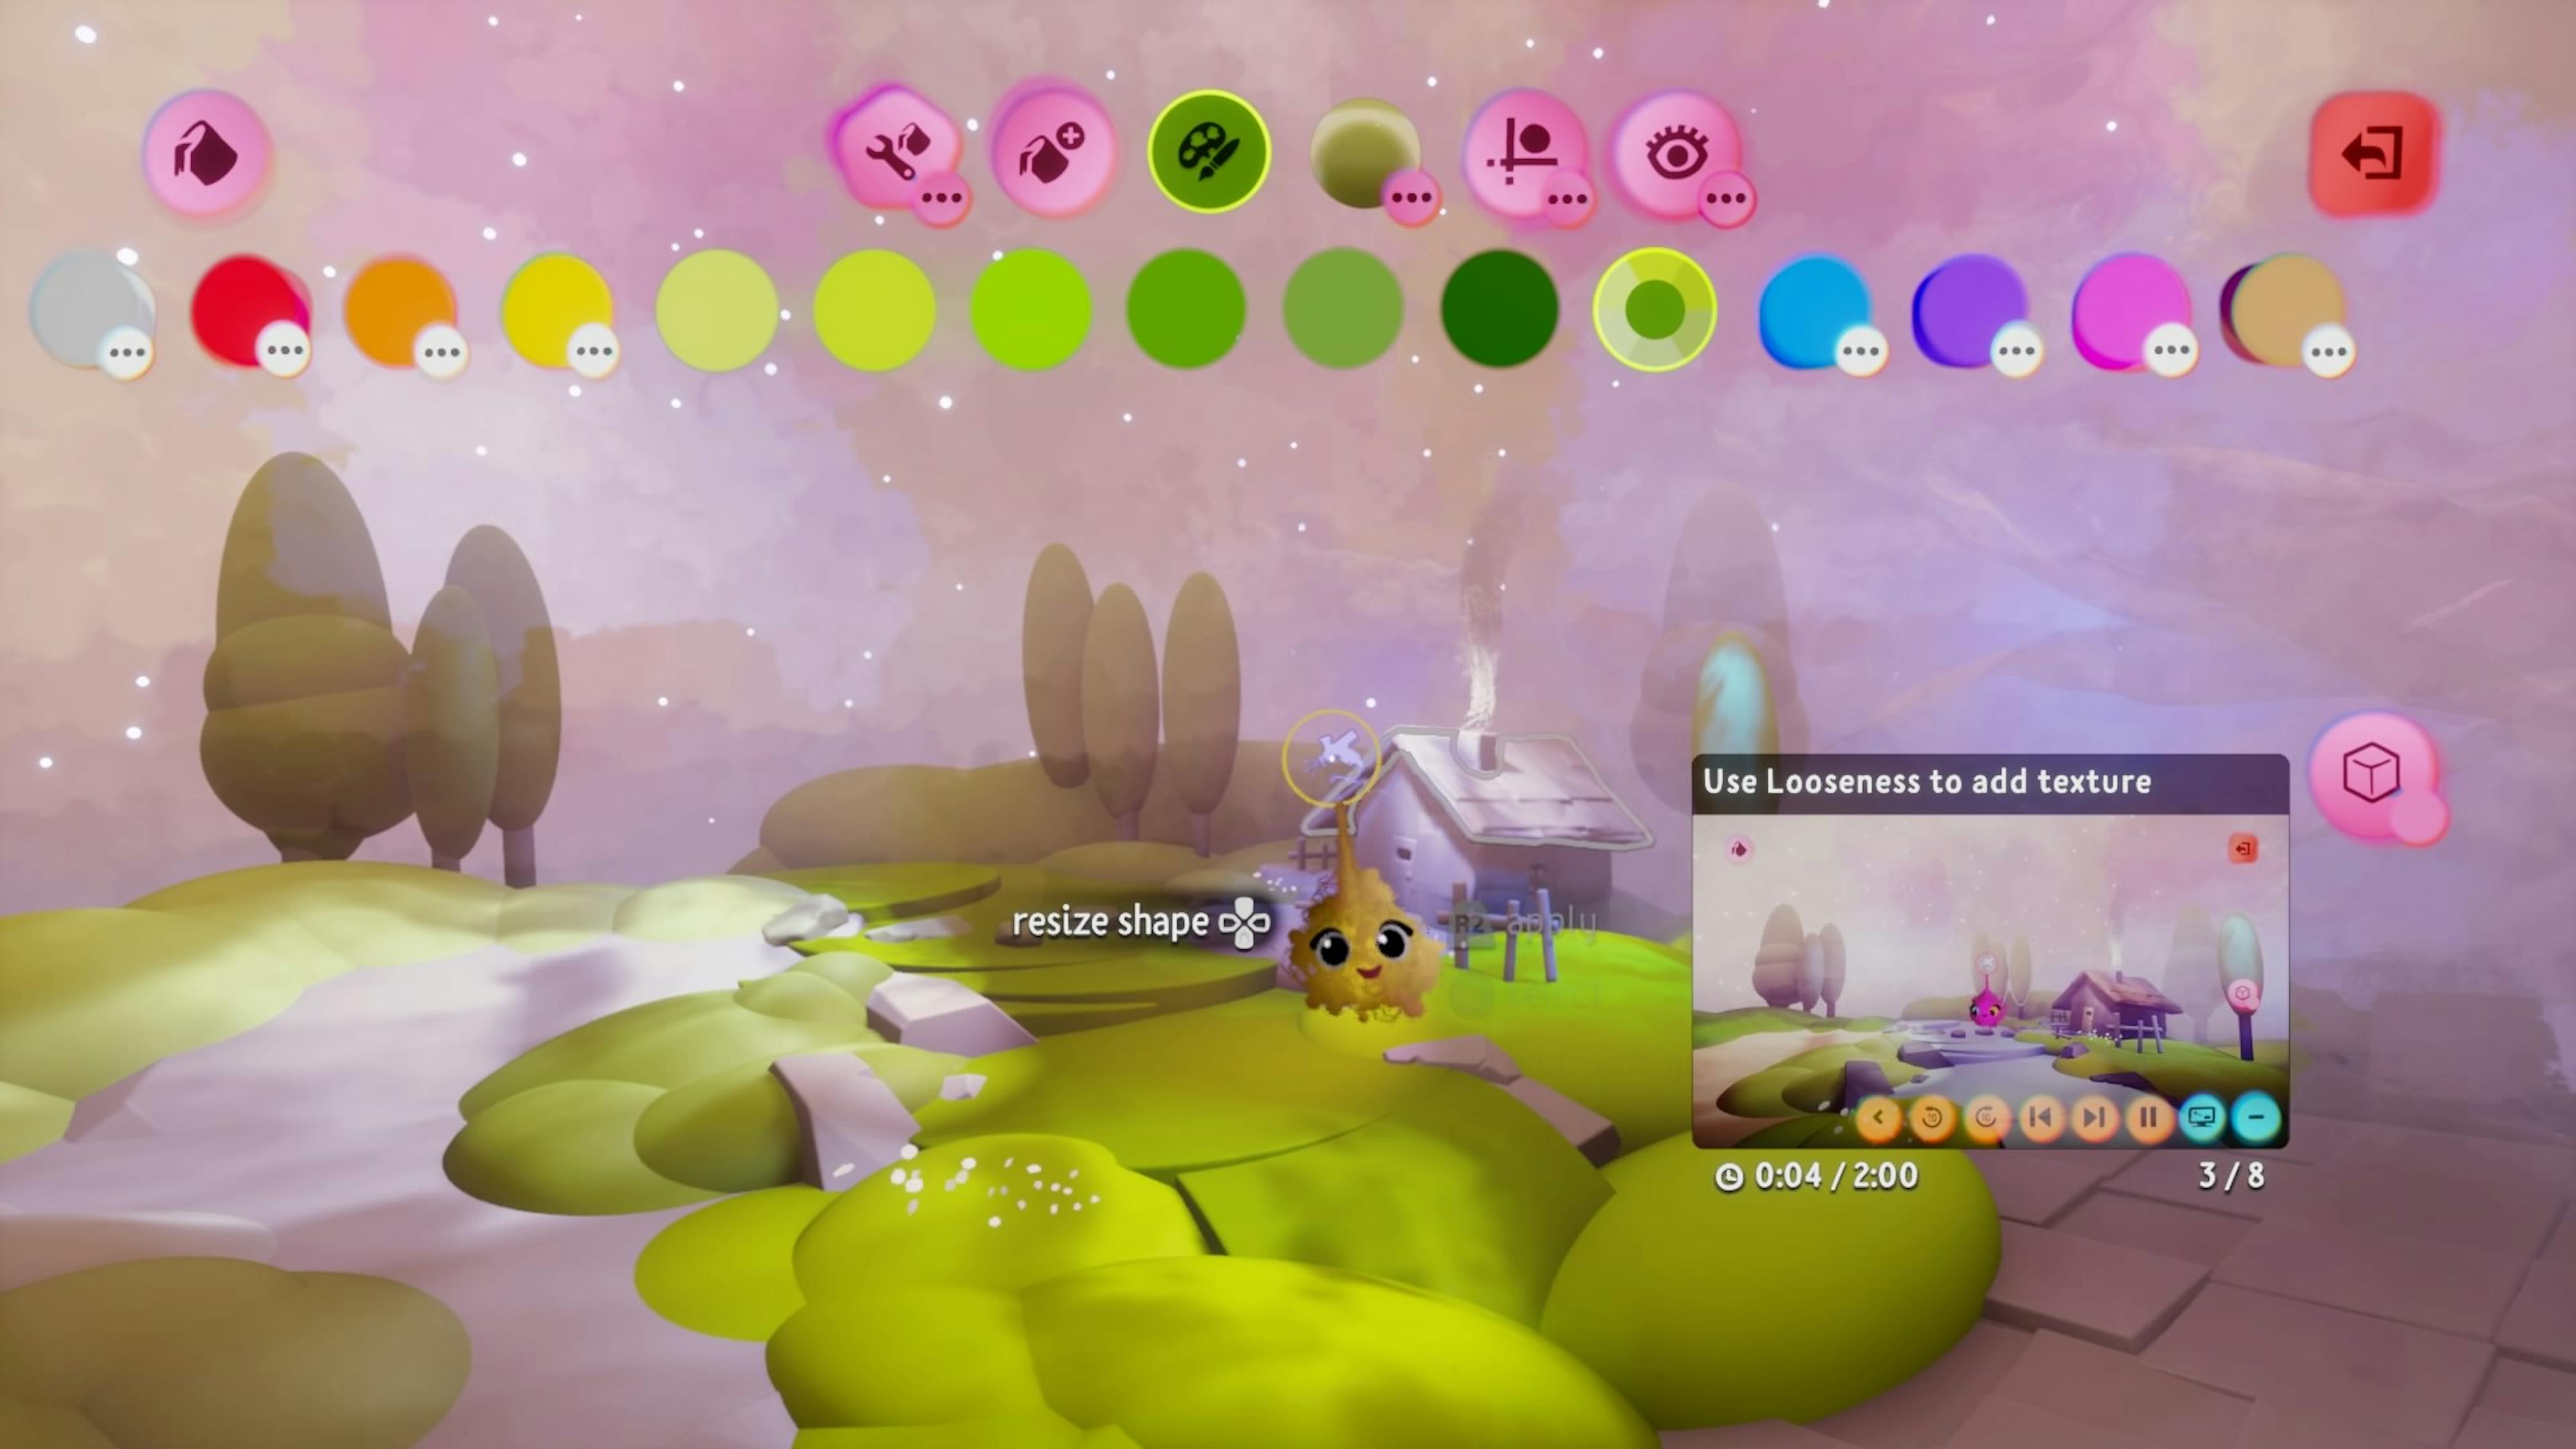 A dreamy screenshot from the video game Dreams, highlighting its editing features.